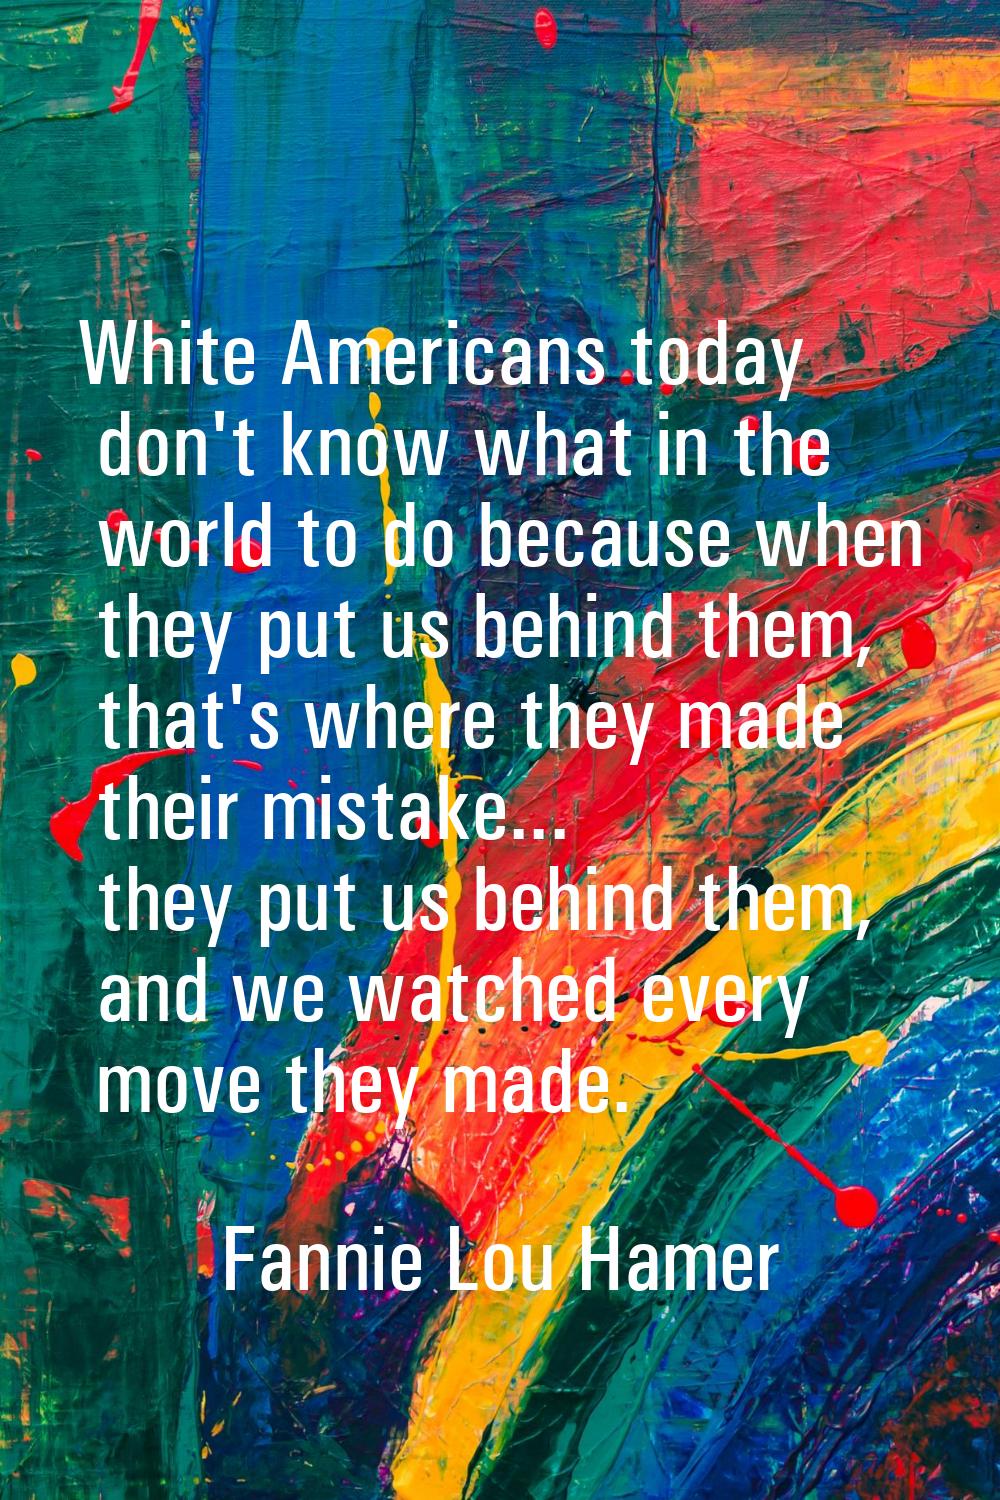 White Americans today don't know what in the world to do because when they put us behind them, that